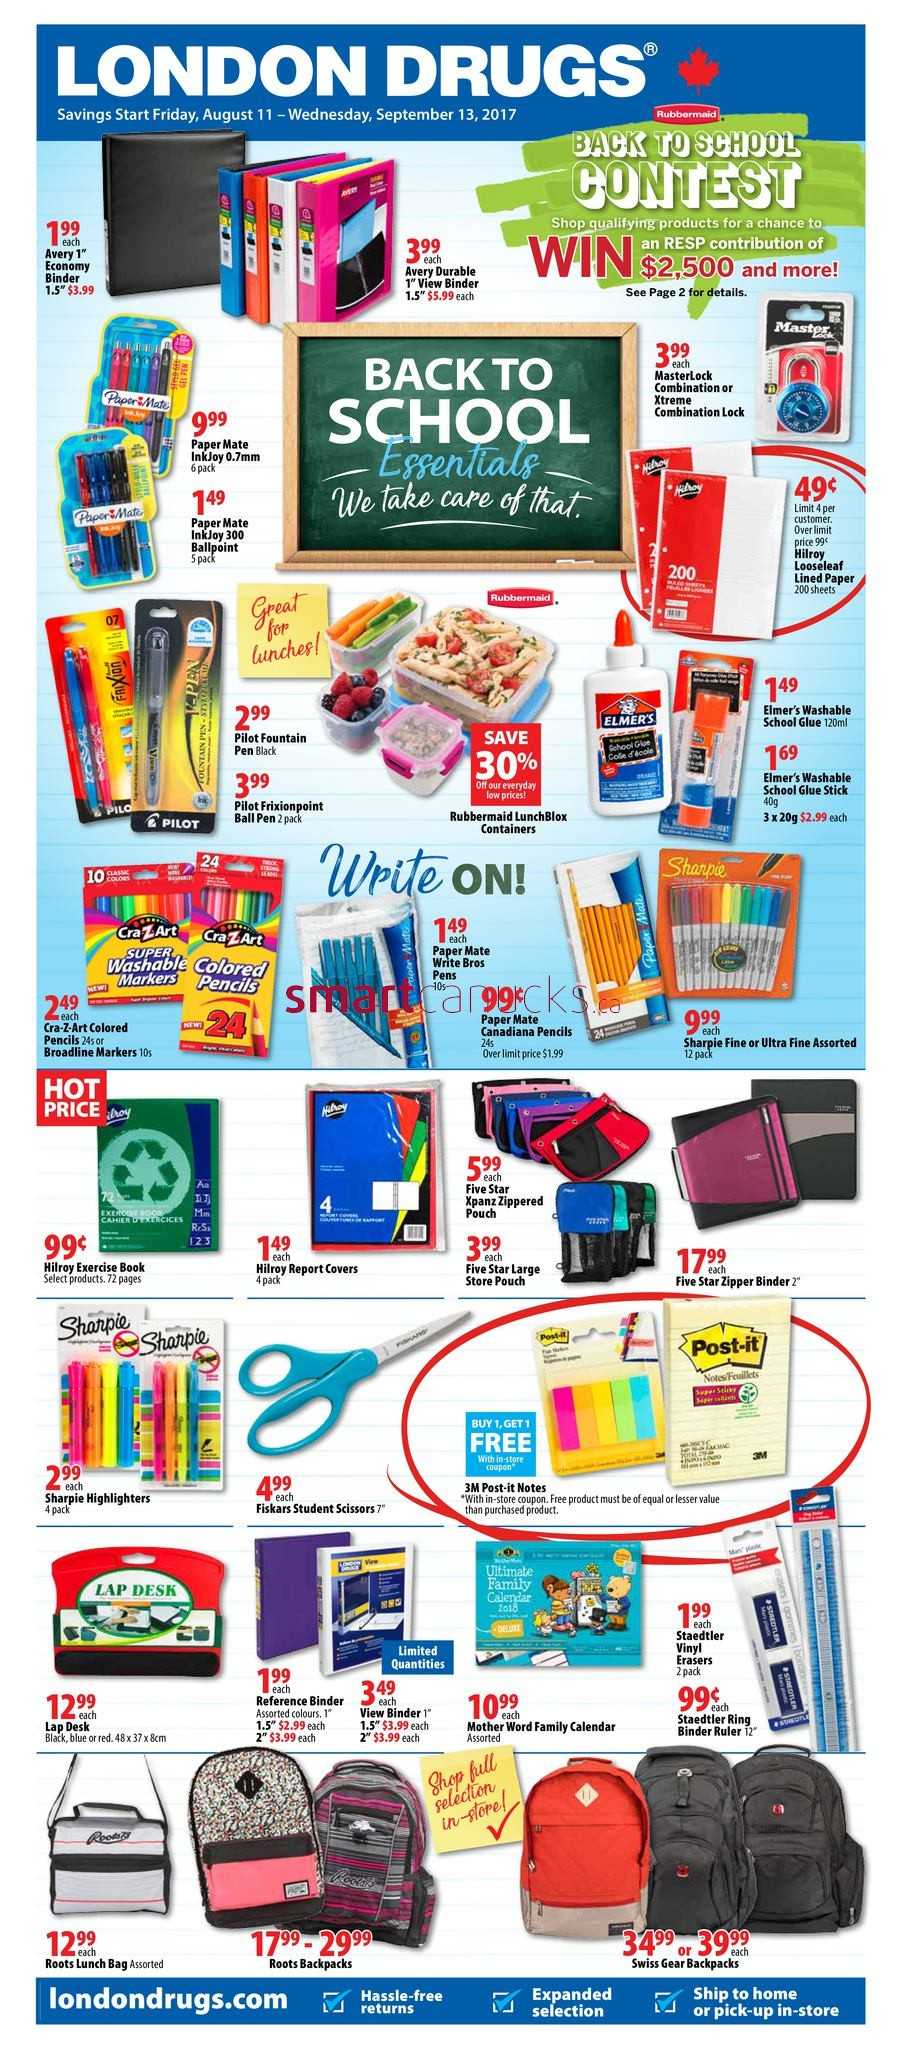 London Drugs Back to School Essentials Flyer August 11 to September 13